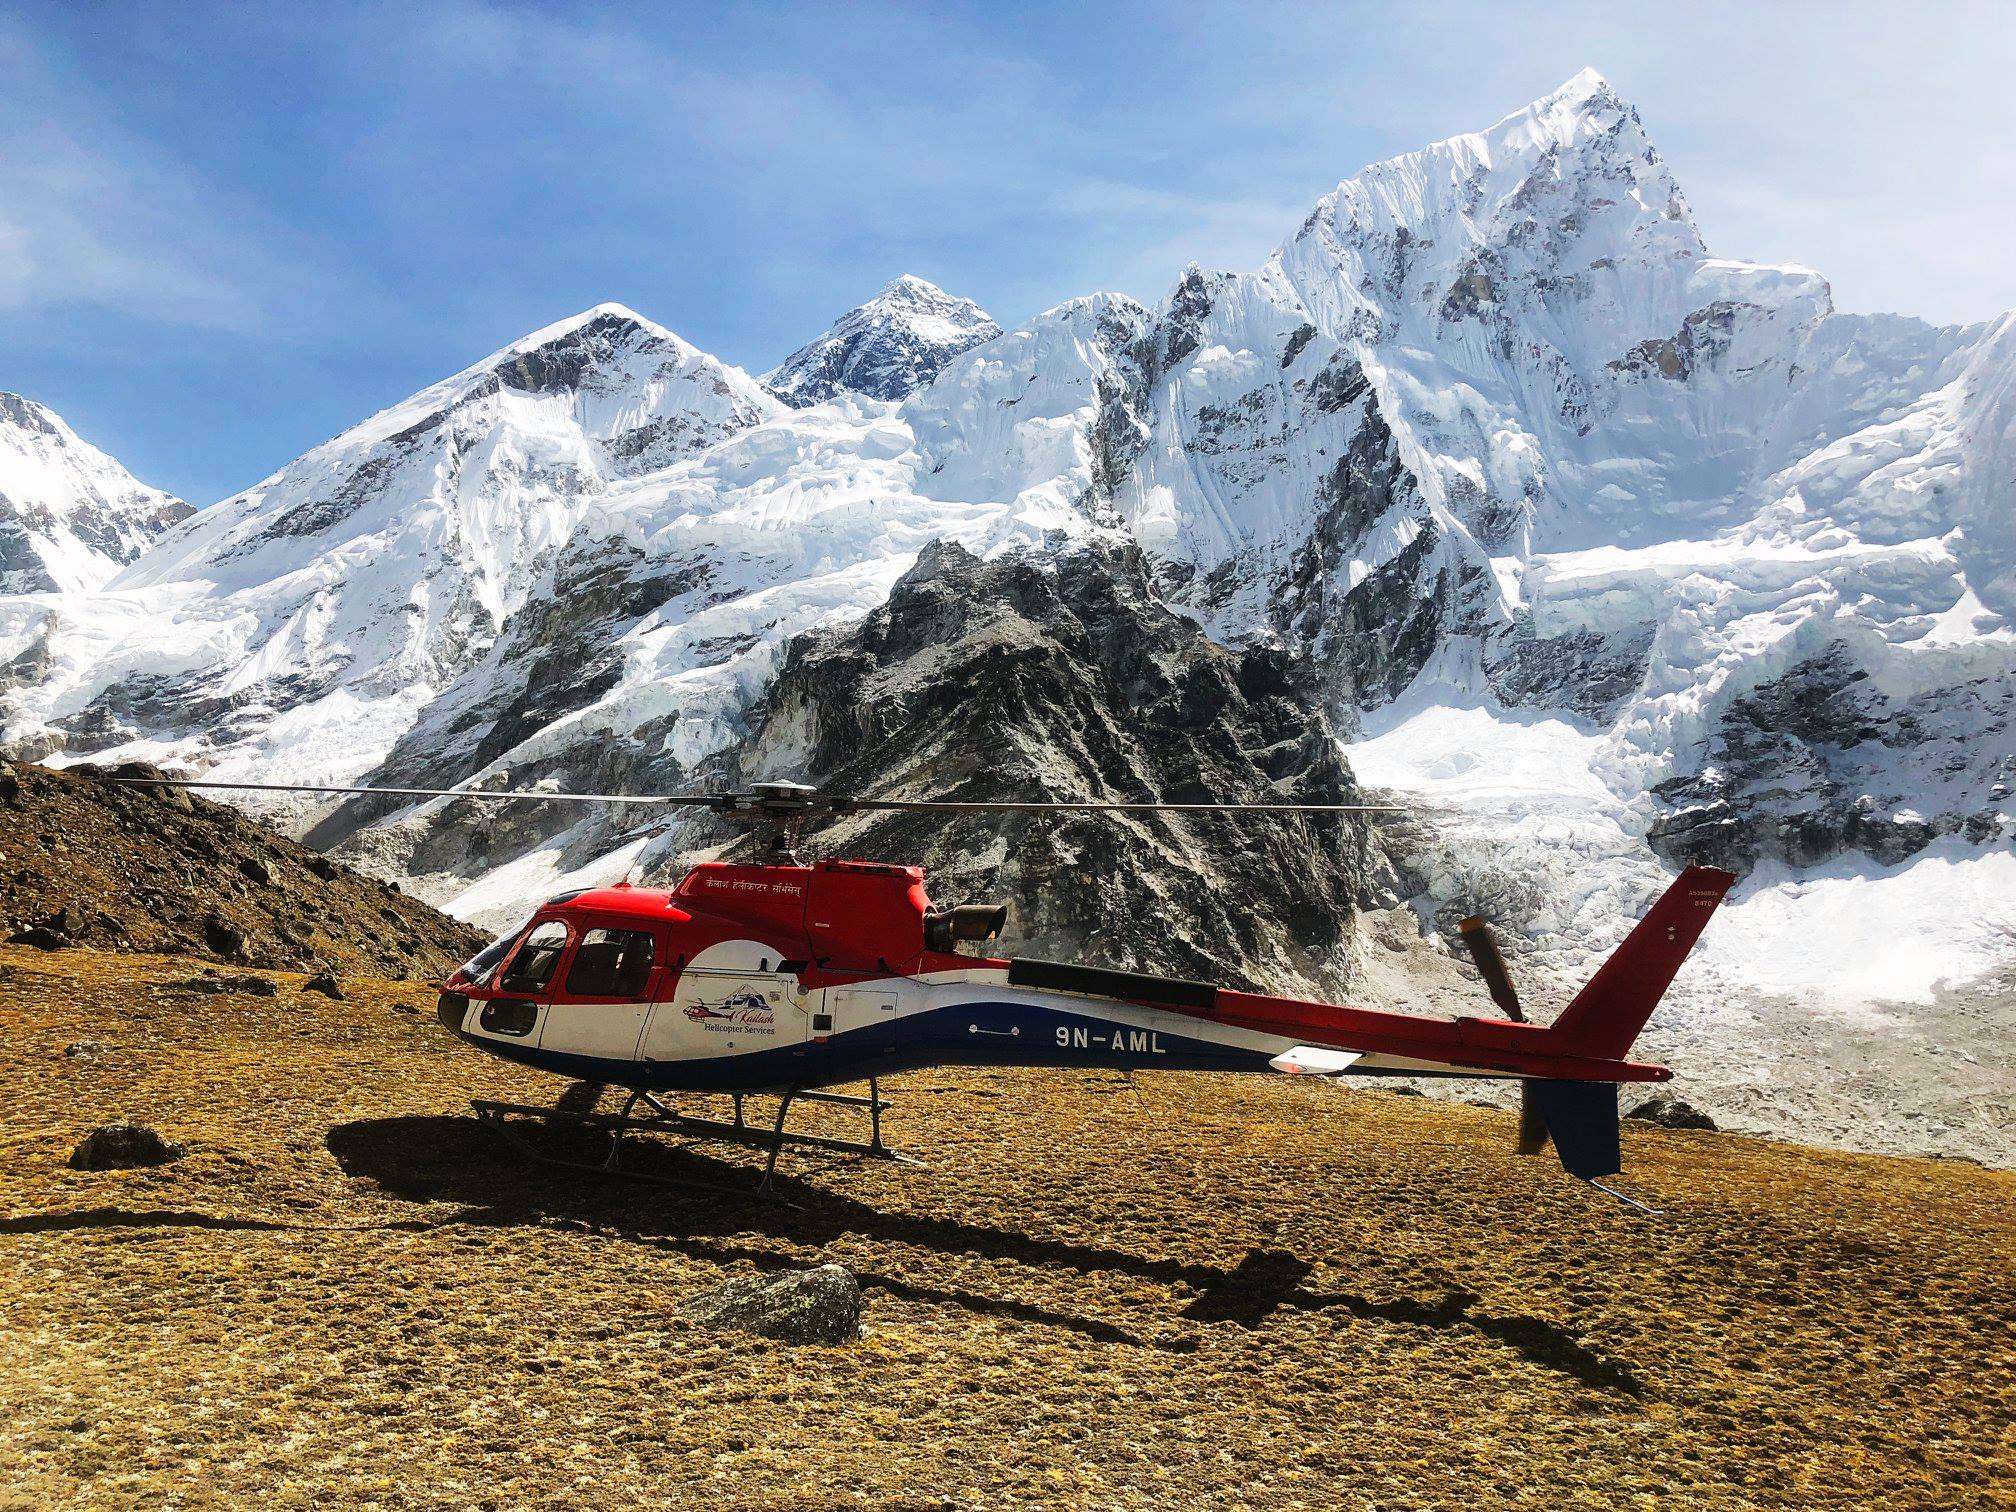 Everest Base Camp Helicopter Tour with Landing - 1 days | HoneyGuide